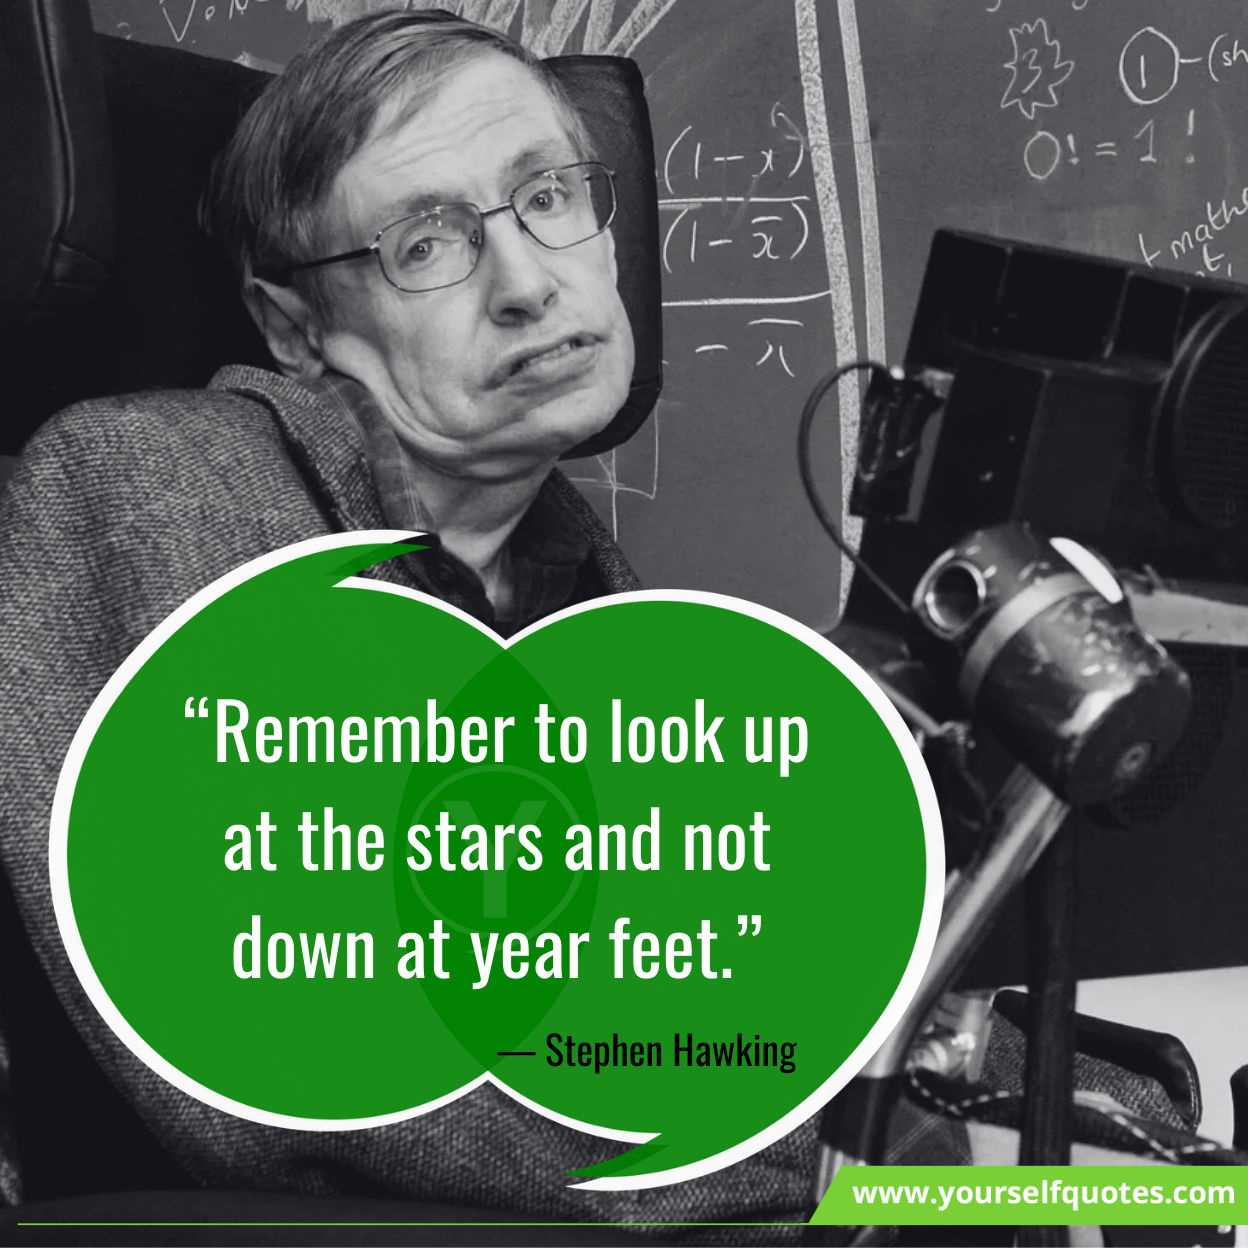 Quotes by Stephen Hawking